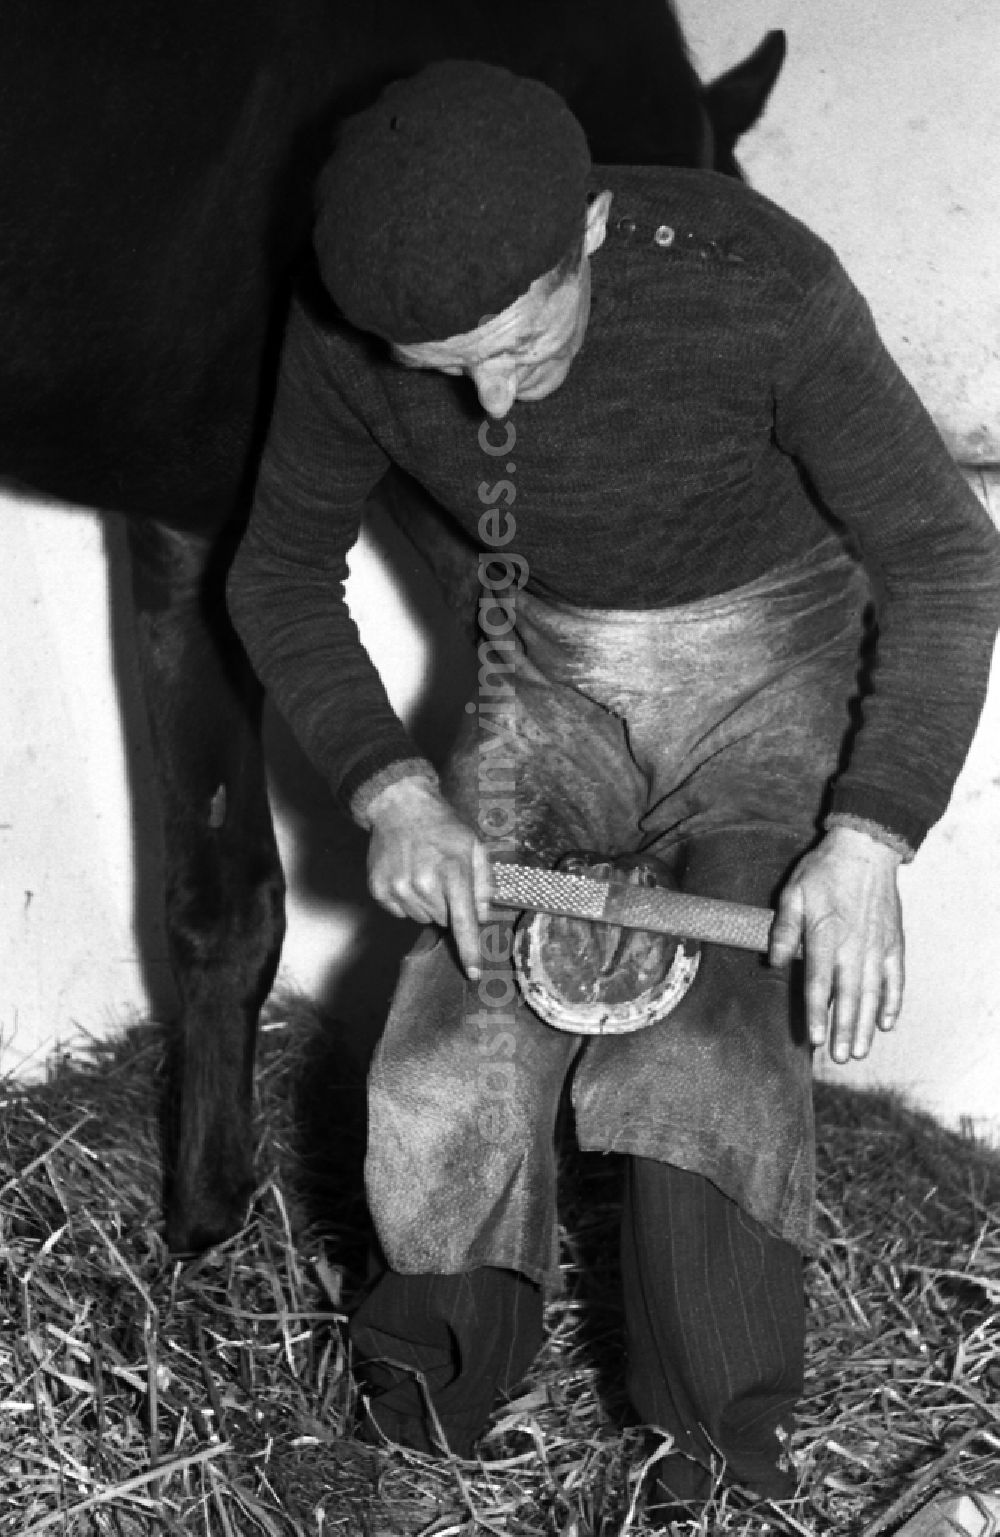 Dresden: Farrier - Farrier shoeing horses' hooves in Dresden in the state Saxony on the territory of the former GDR, German Democratic Republic